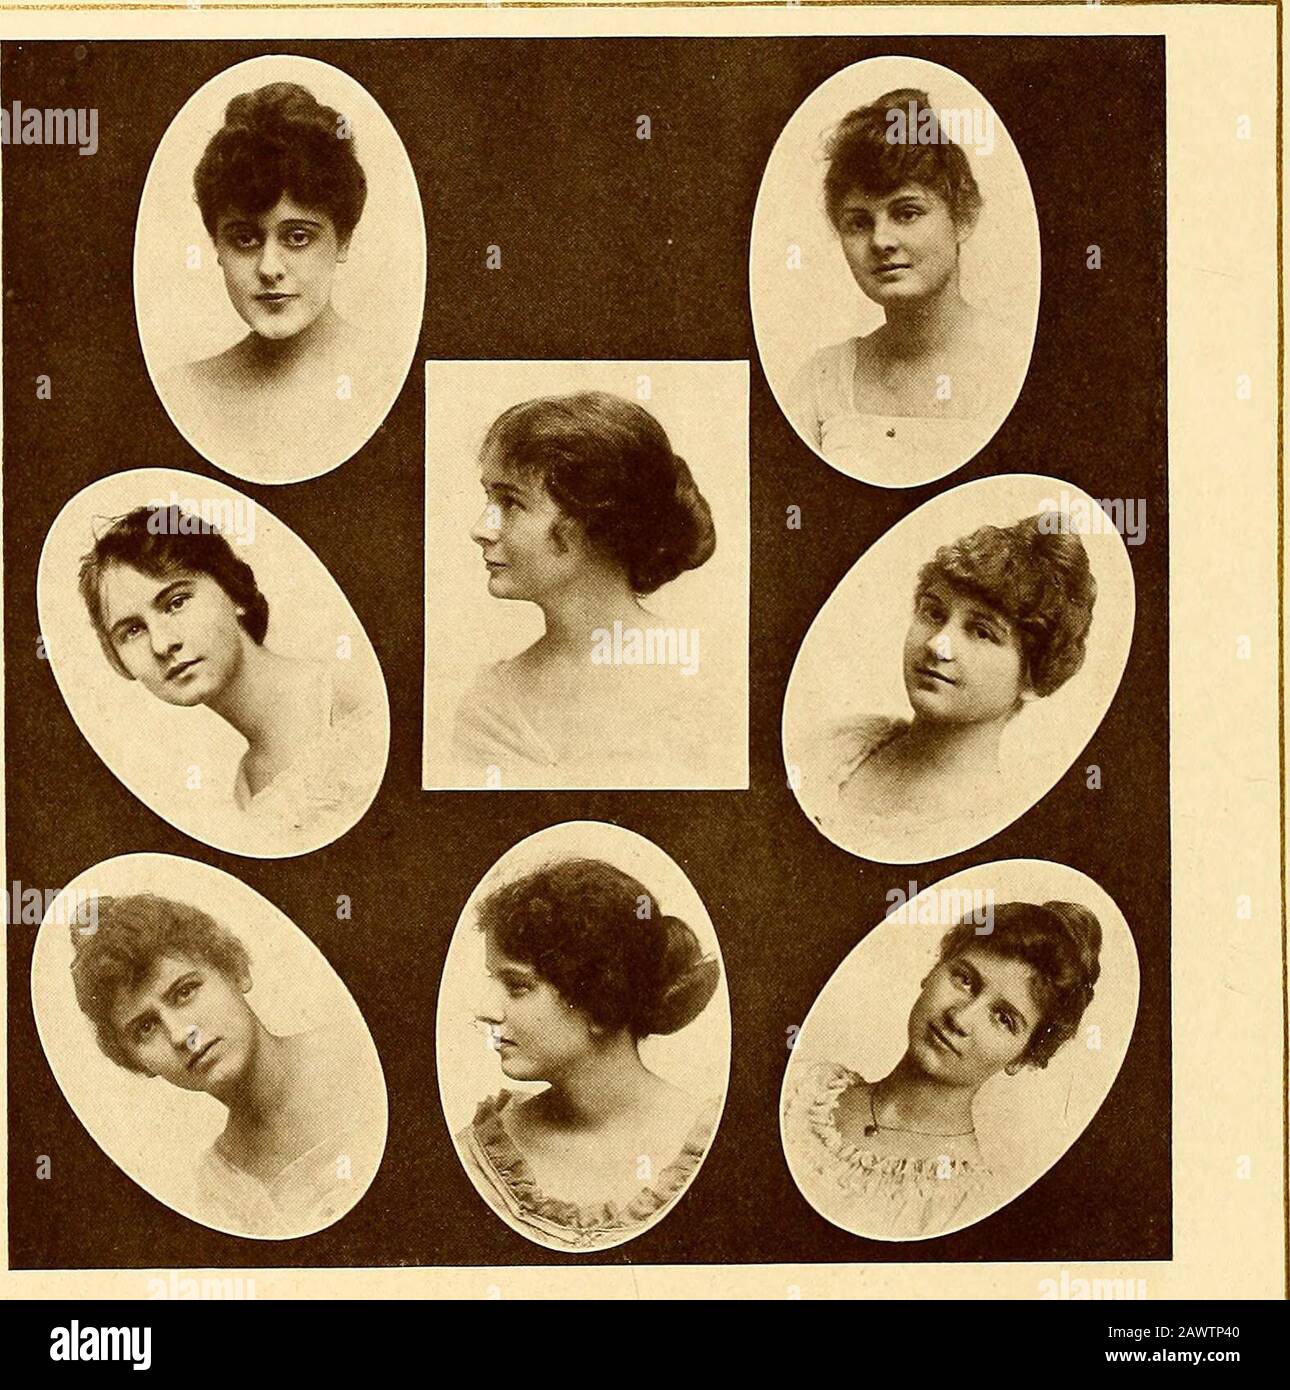 Silhouette (1916) . silhouetttte:. Eloise Gay Fannie Oliver Editor-in-Chief Local EditorClara Whips Emma Katherine Anderson Assistant Editor-in-Chief Art Editor Laura Cooper Julia Anderson Business Manager Assistant Art Editor Laurie Caldwell Miriam Reynodls Assistant Business Manager Editorial Scribe CLASS REPRESENTATIVES Margaret Watts Freshman Maymie Callawai- Sophomore Mary Eakes Junior Jeannette Victor Senior .SILl-TOI JF^n^g^F- Stock Photo